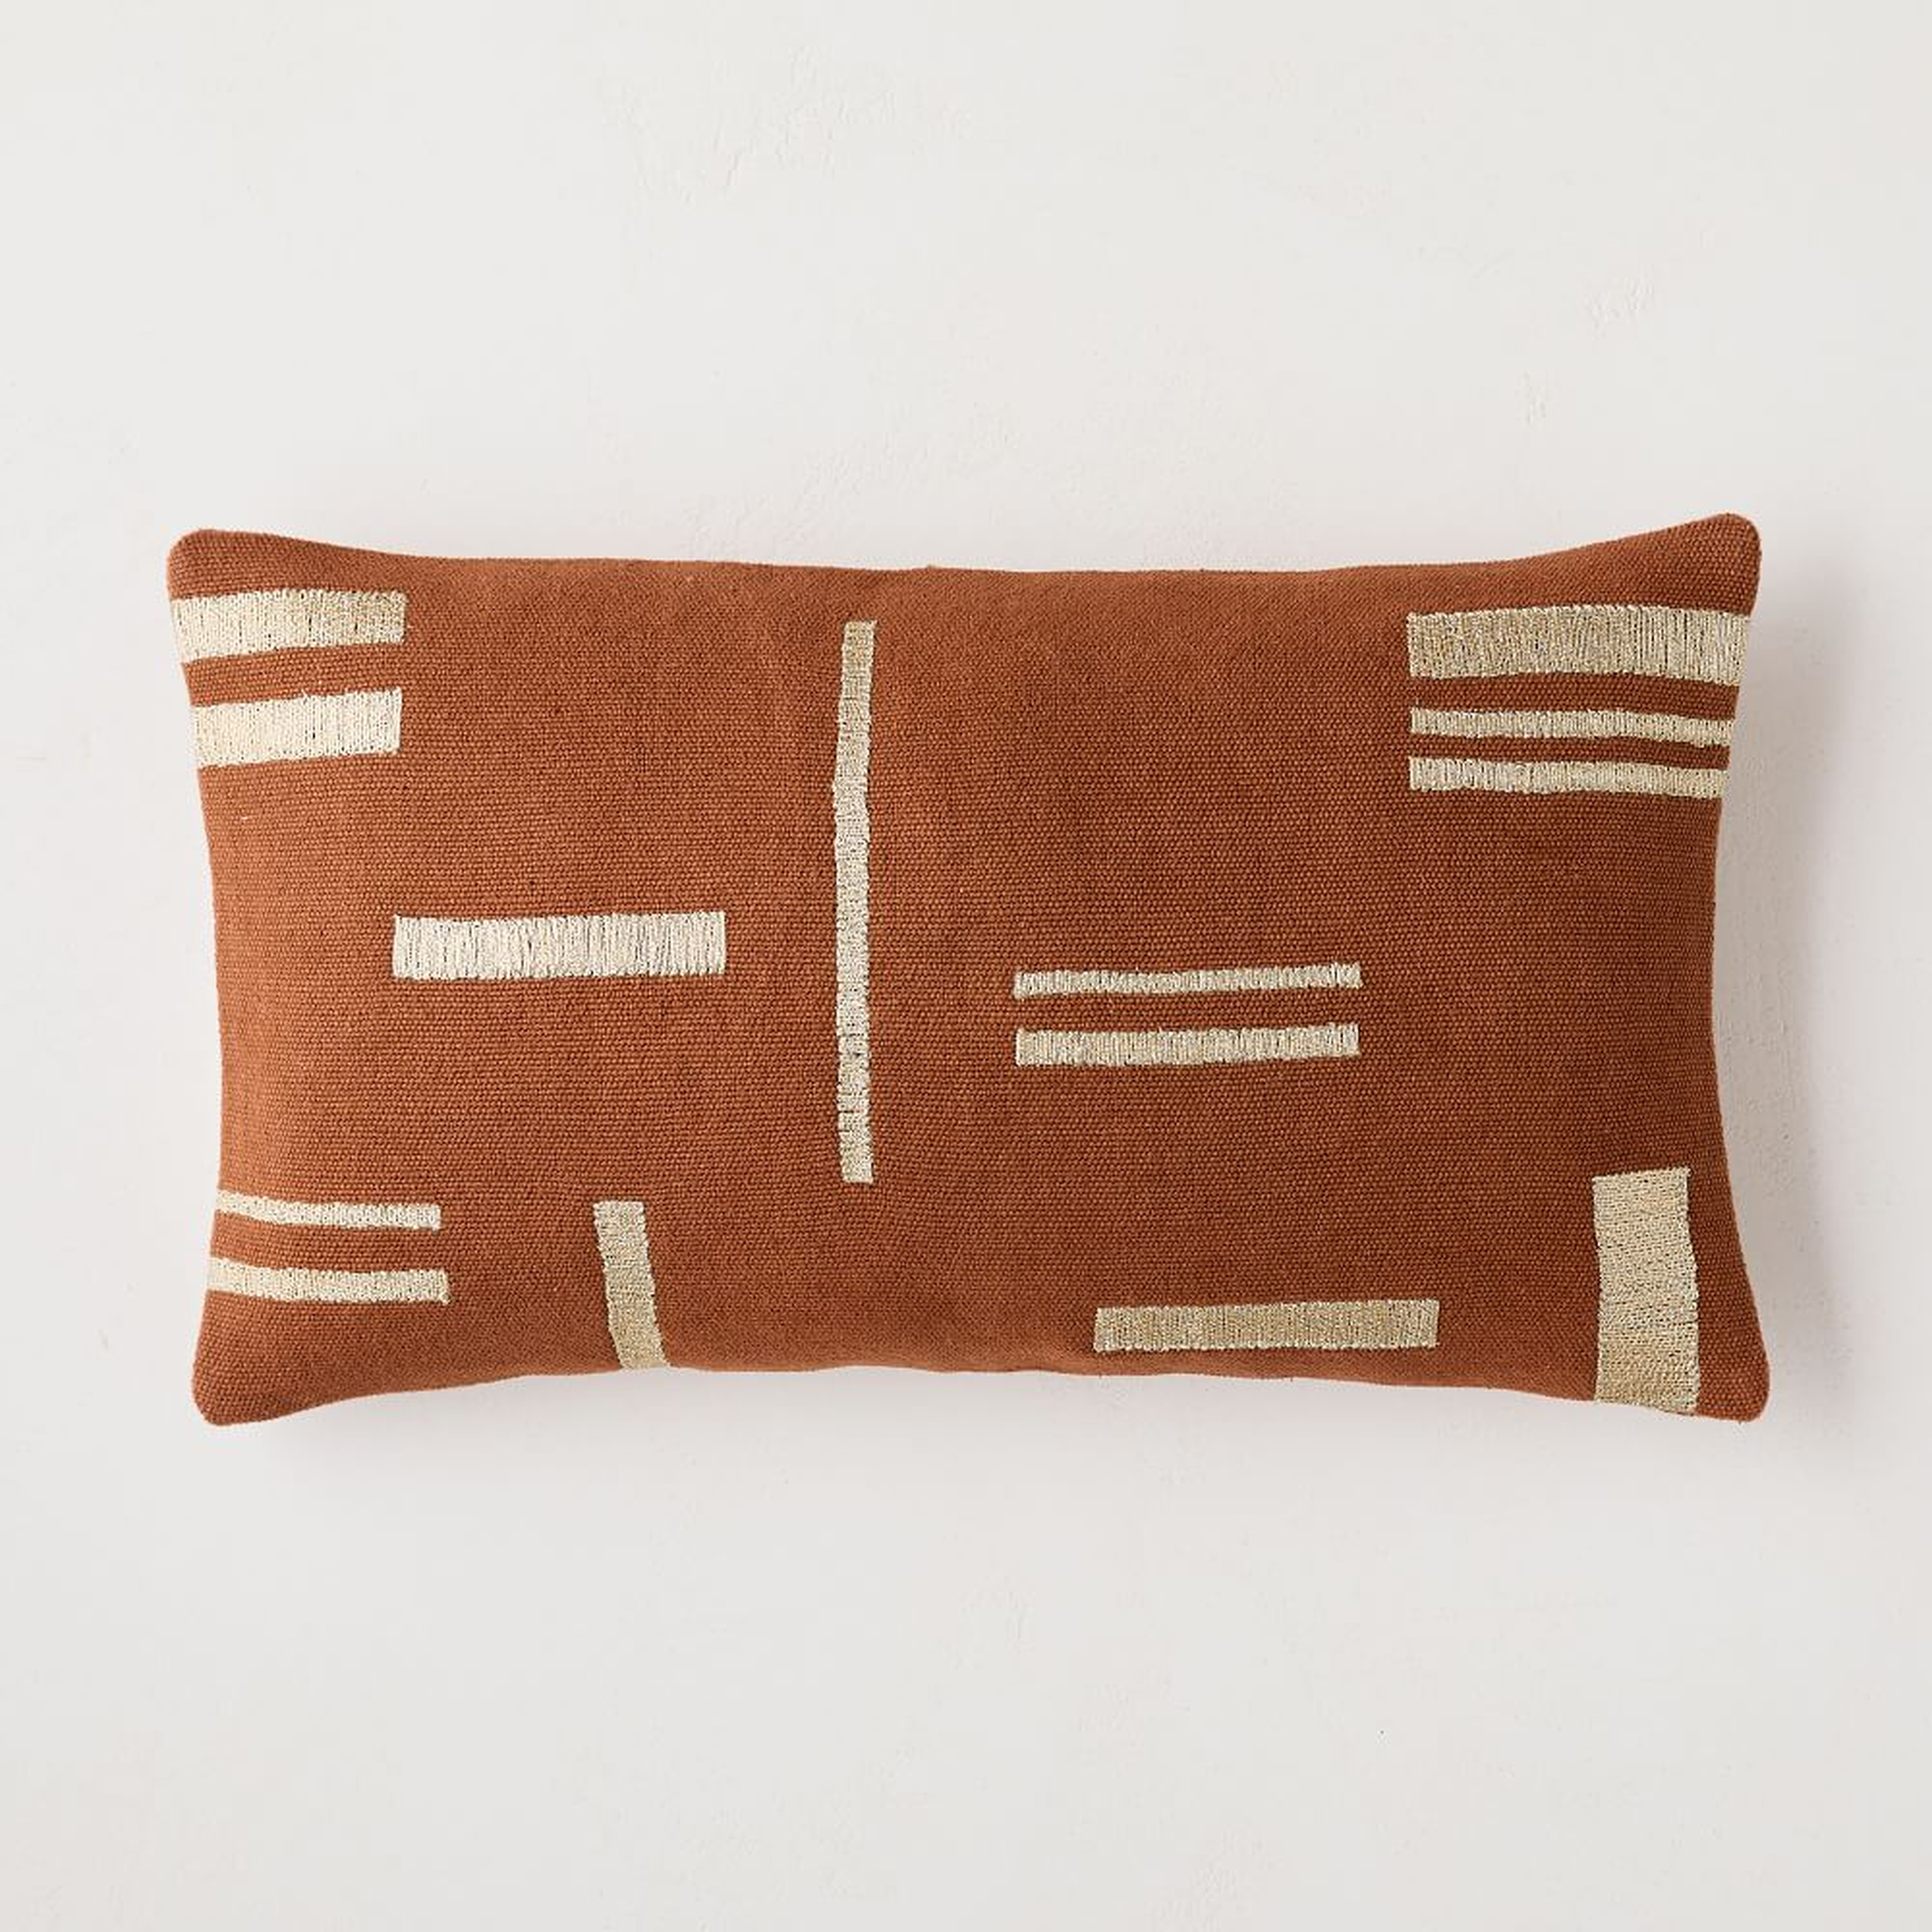 Embroidered Metallic Blocks Pillow Cover, 12"x21", Copper Rust - West Elm